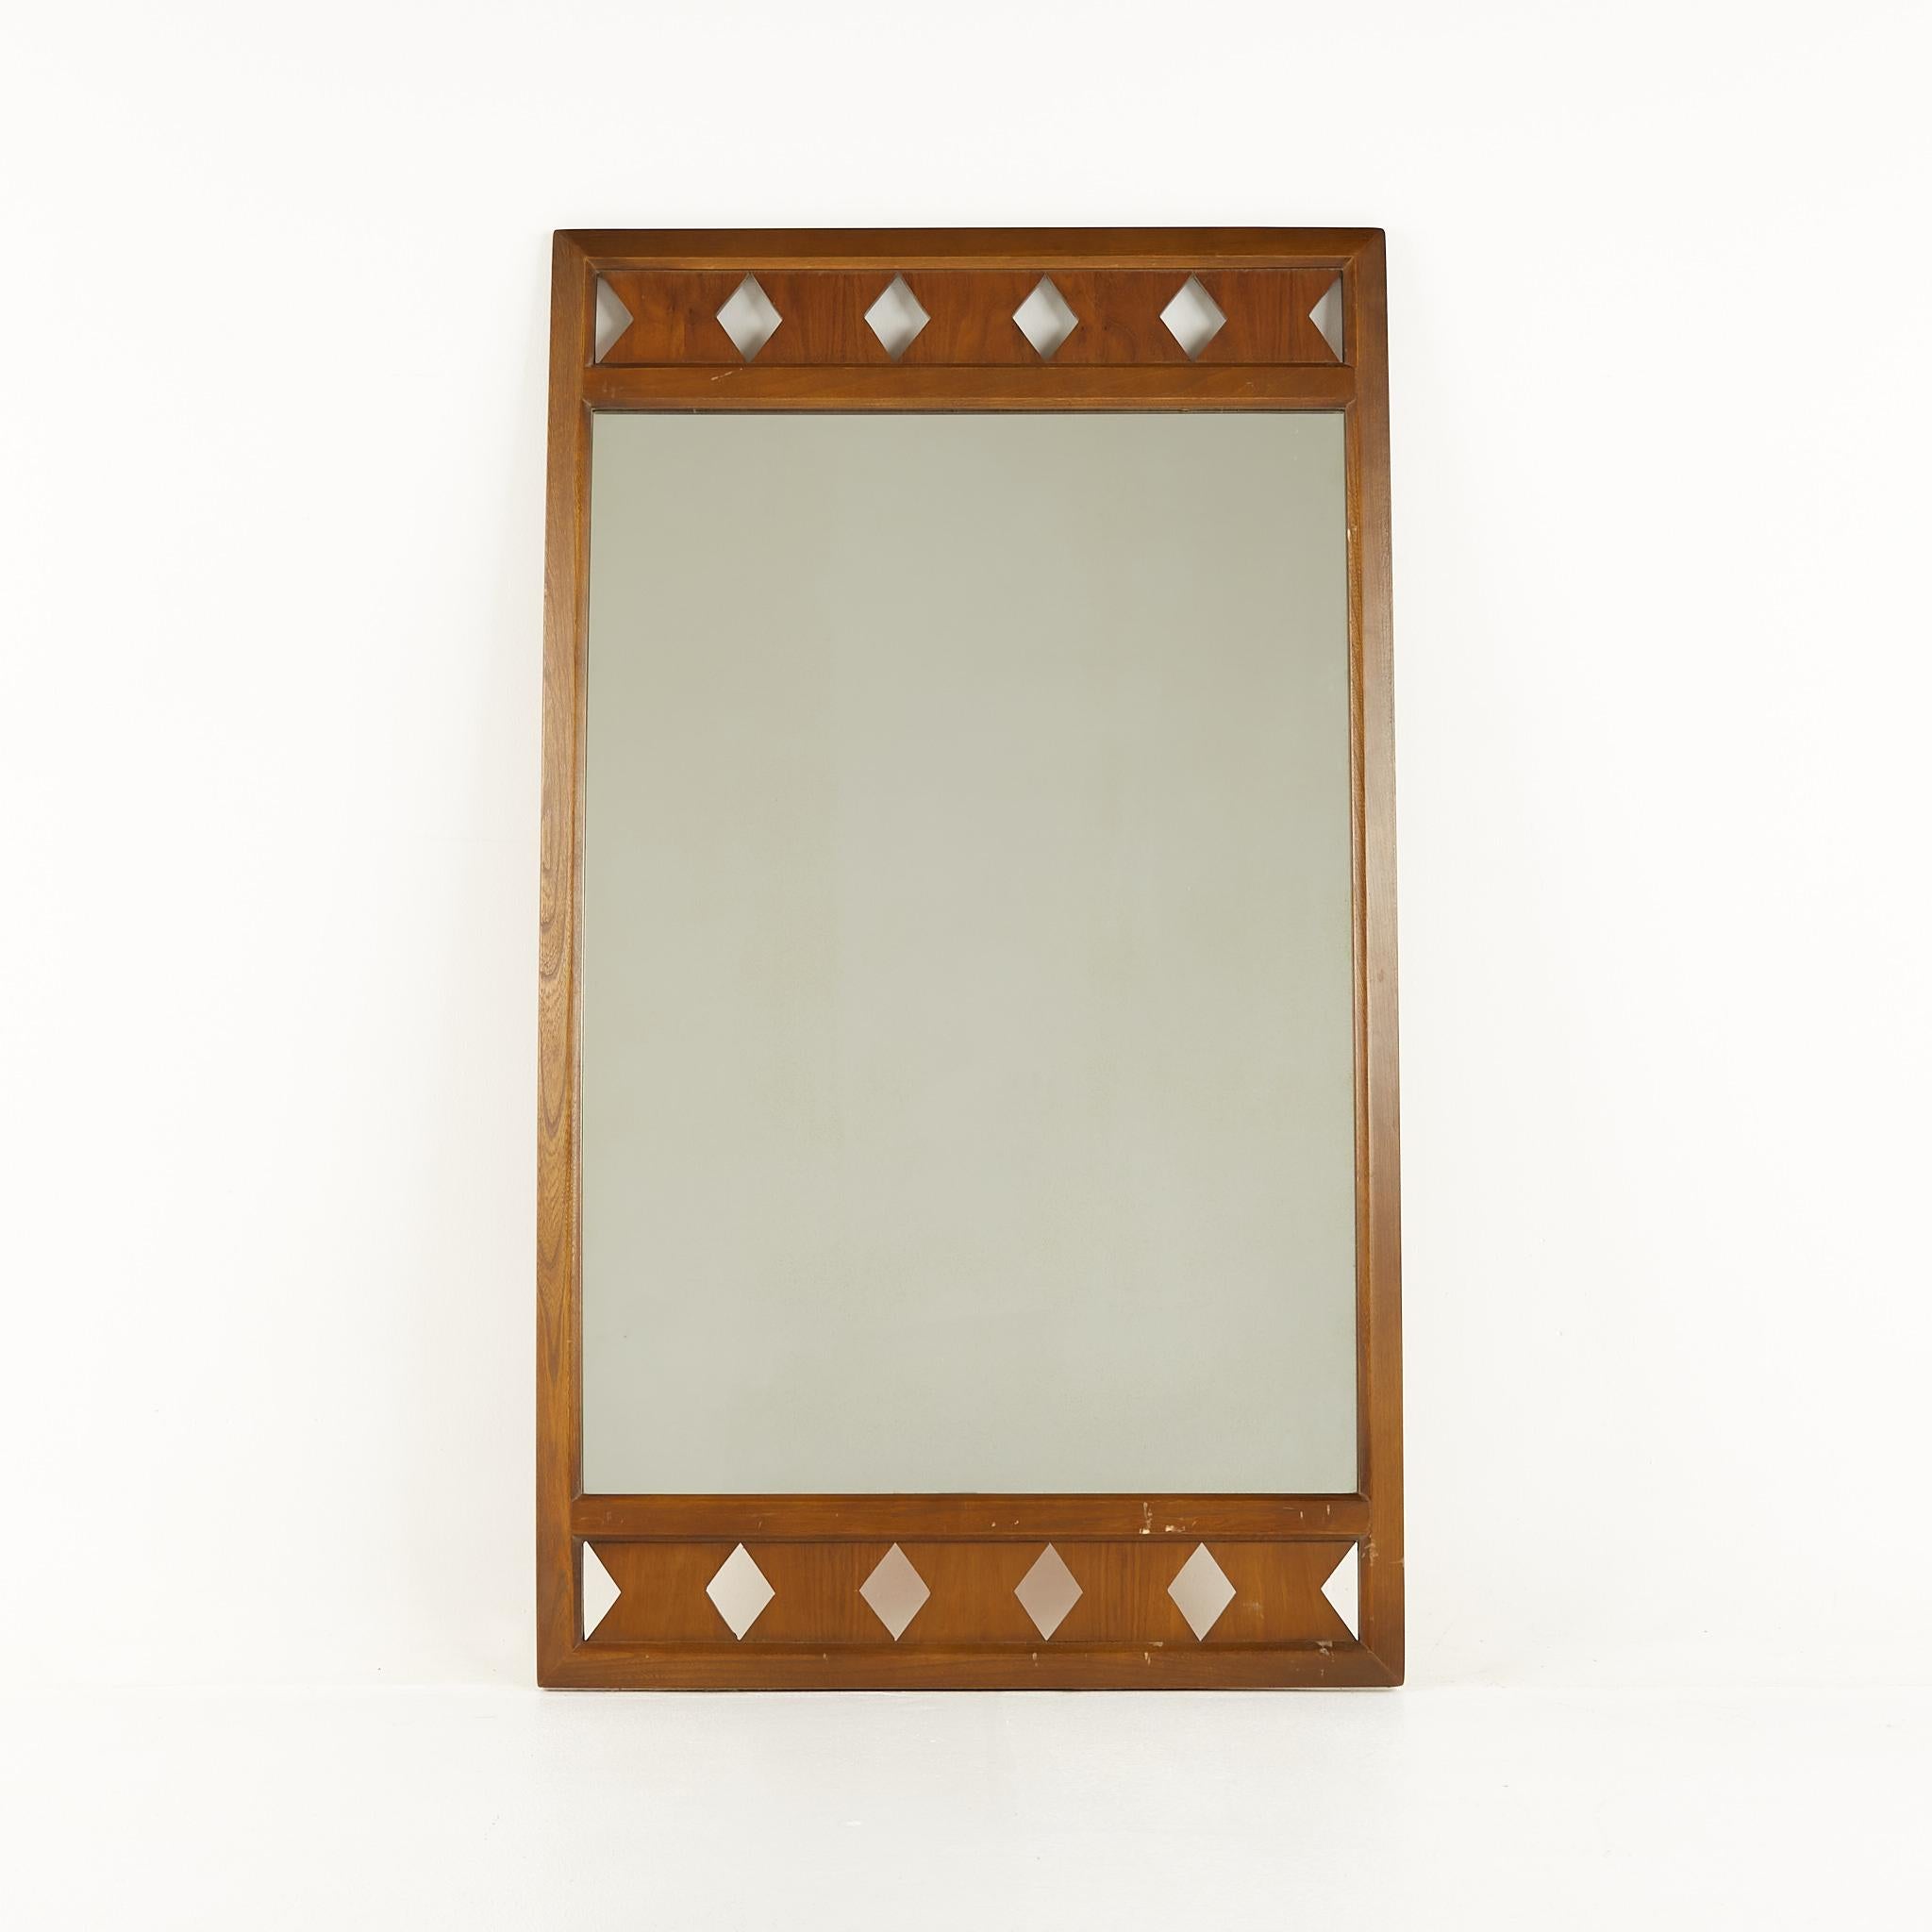 Basic Witz mid century walnut mirror

This mirror measures: 31 wide x 1 deep x 53 inches high

All pieces of furniture can be had in what we call restored vintage condition. That means the piece is restored upon purchase so it’s free of